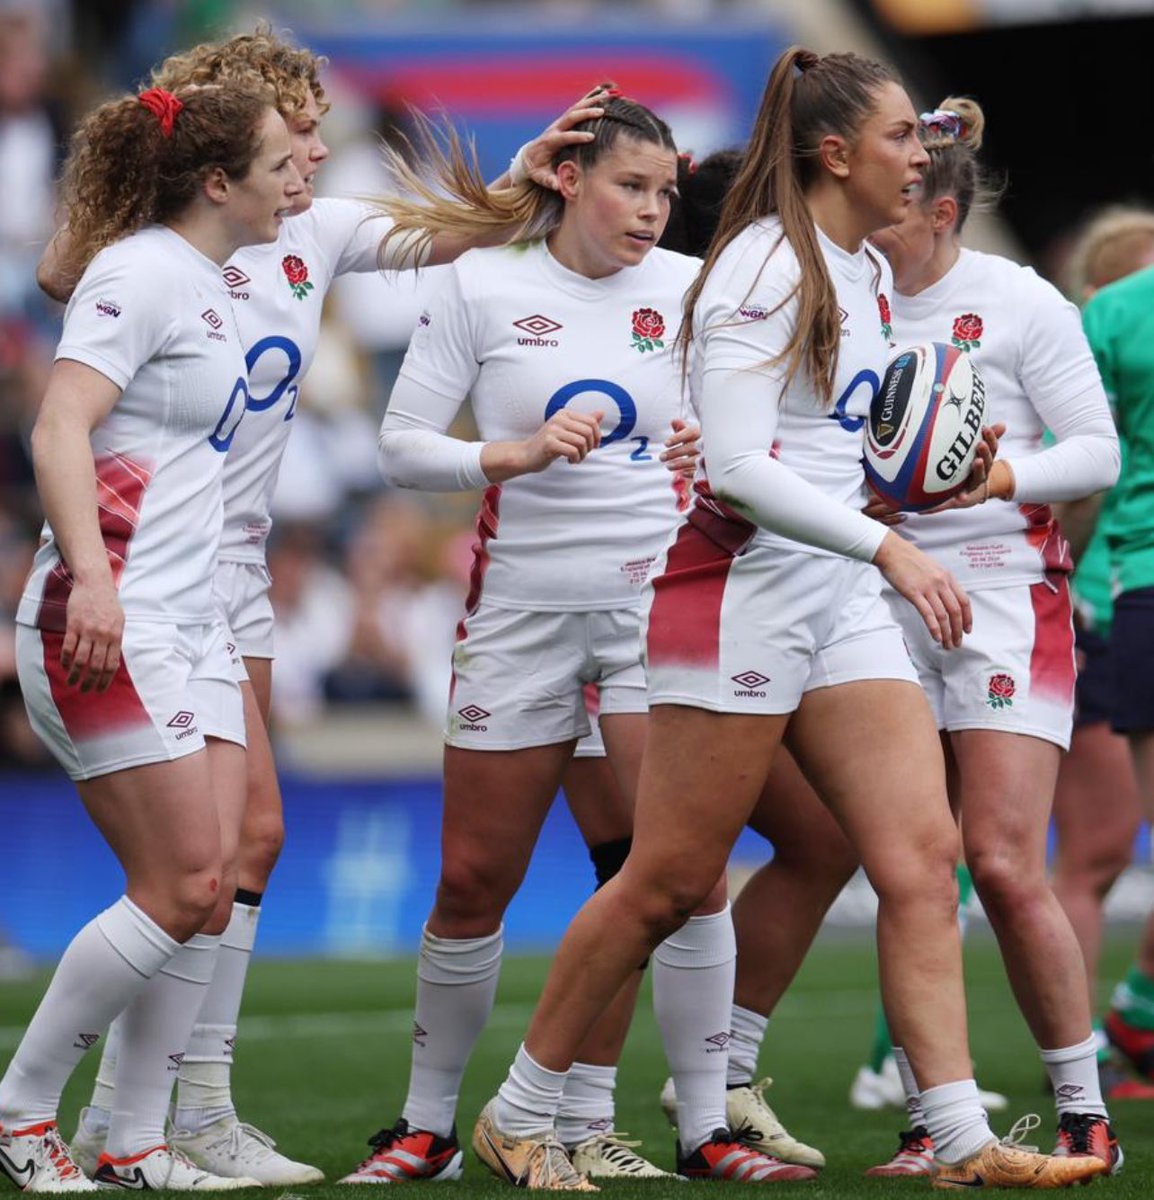 That’s another win for our @RedRosesRugby with 🏴󠁧󠁢󠁥󠁮󠁧󠁿 88 - 10 🇮🇪 on home soil at Twickenham Stadium. As always, we’re so proud of you 👏 #WearTheRose 🌹 #ENGvIRL #GuinnessW6N